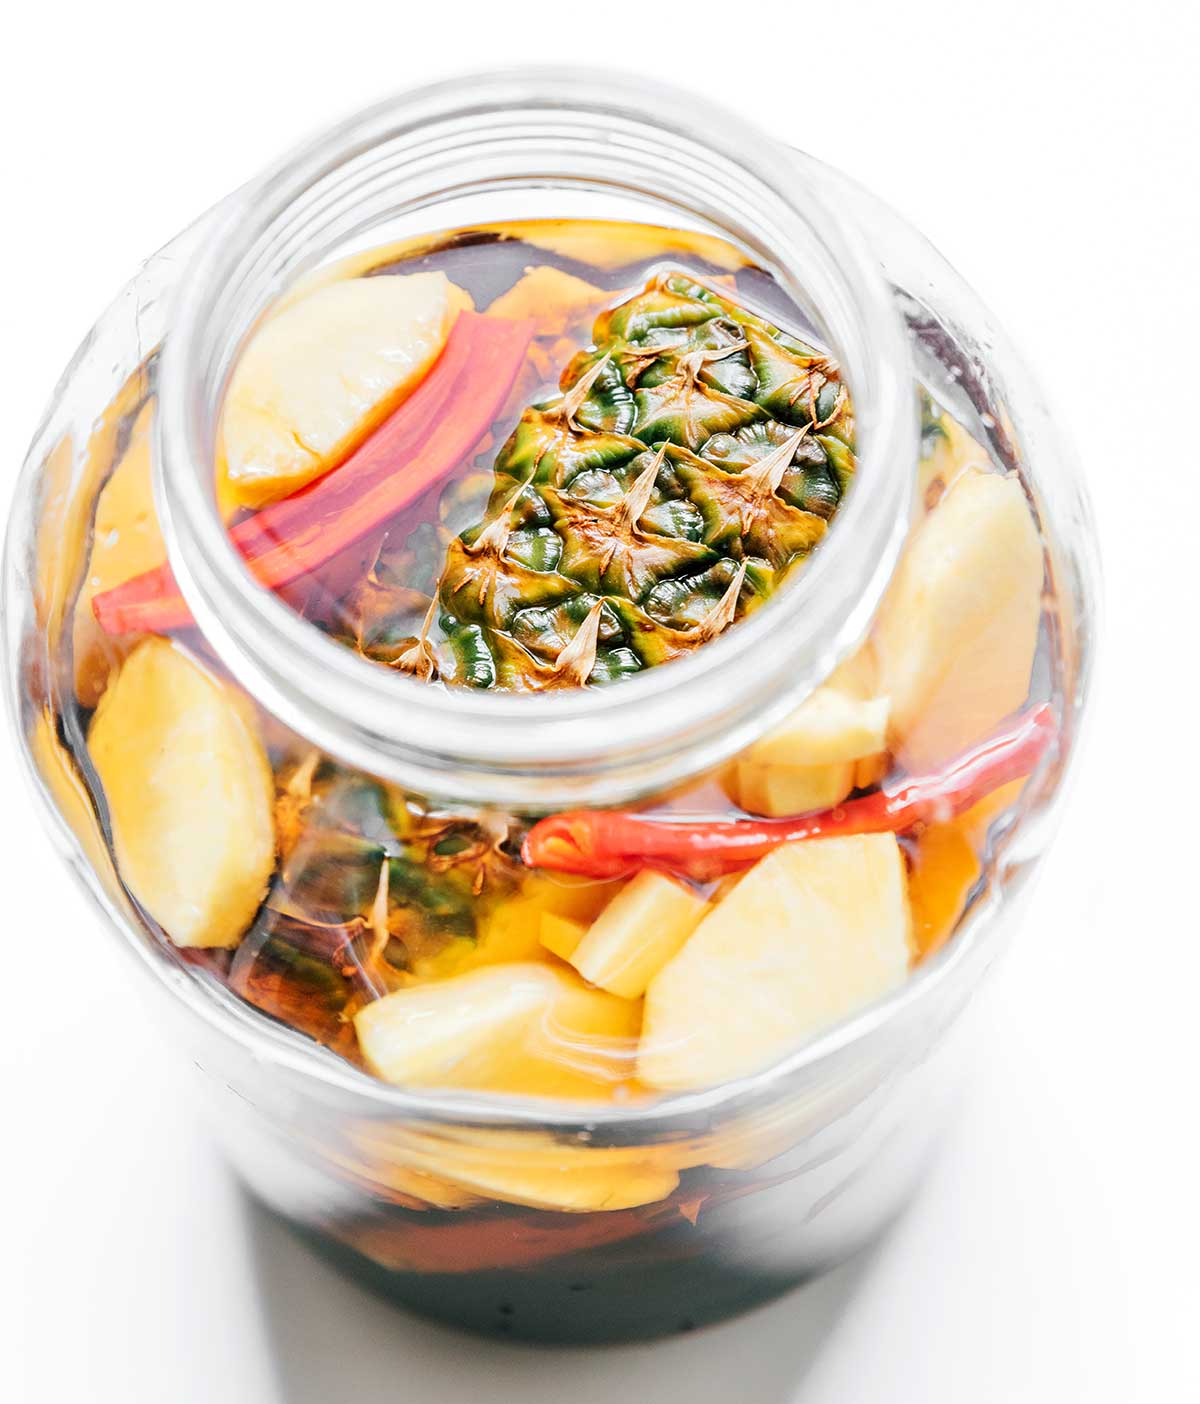 Pineapple rind, ginger, and chili in a glass jar with tepache